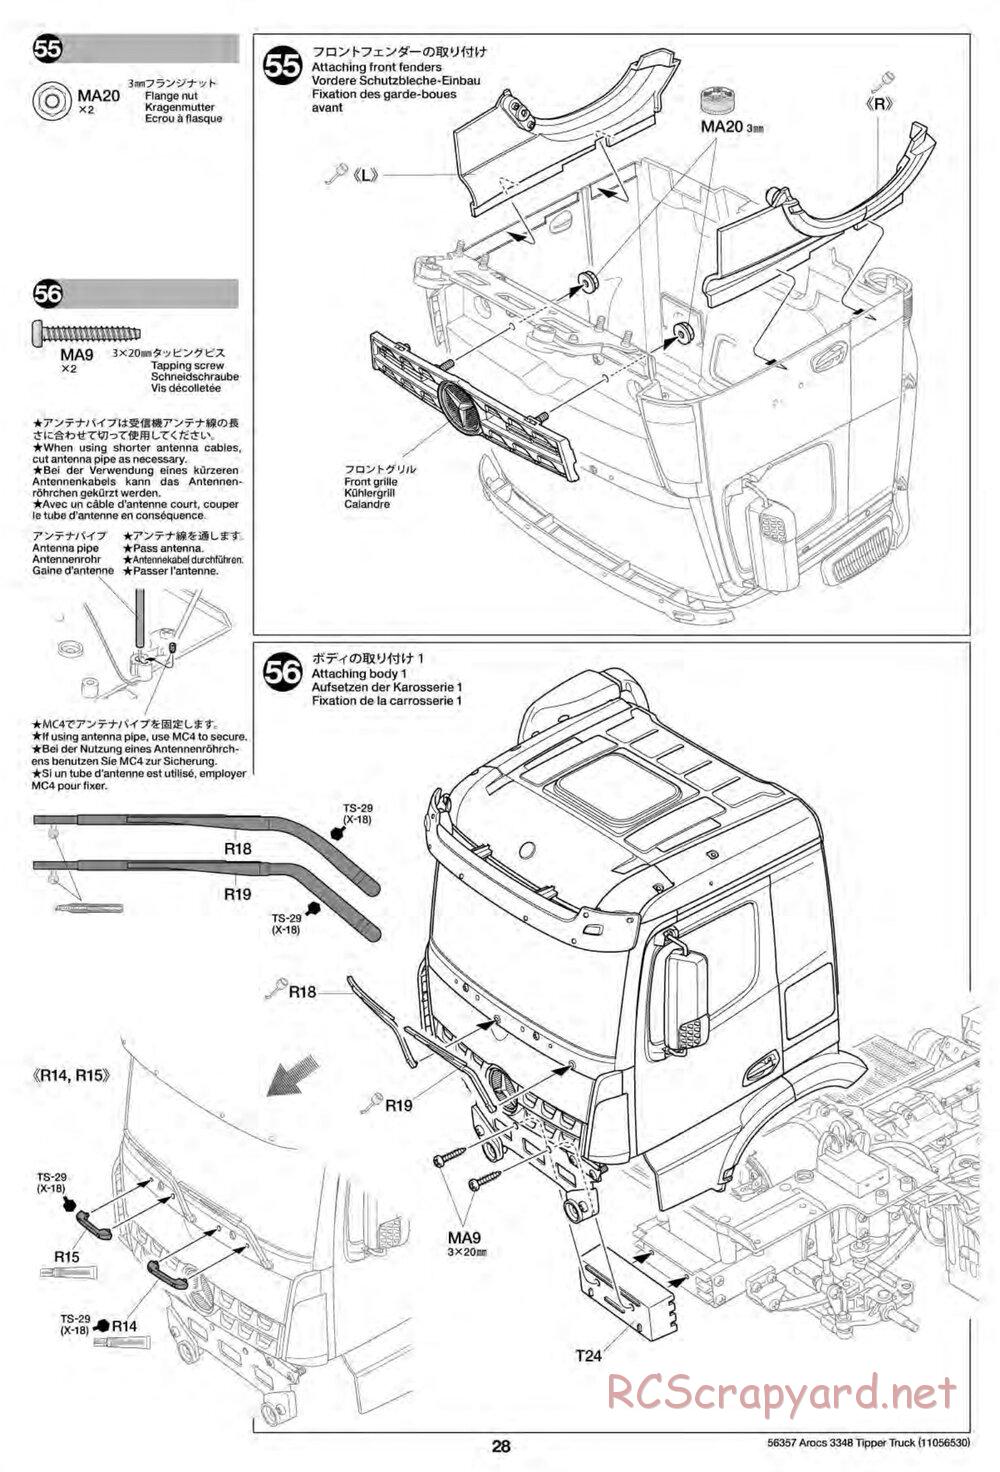 Tamiya - Mercedes-Benz Arocs 3348 6x4 Tipper Truck Chassis - Manual - Page 28